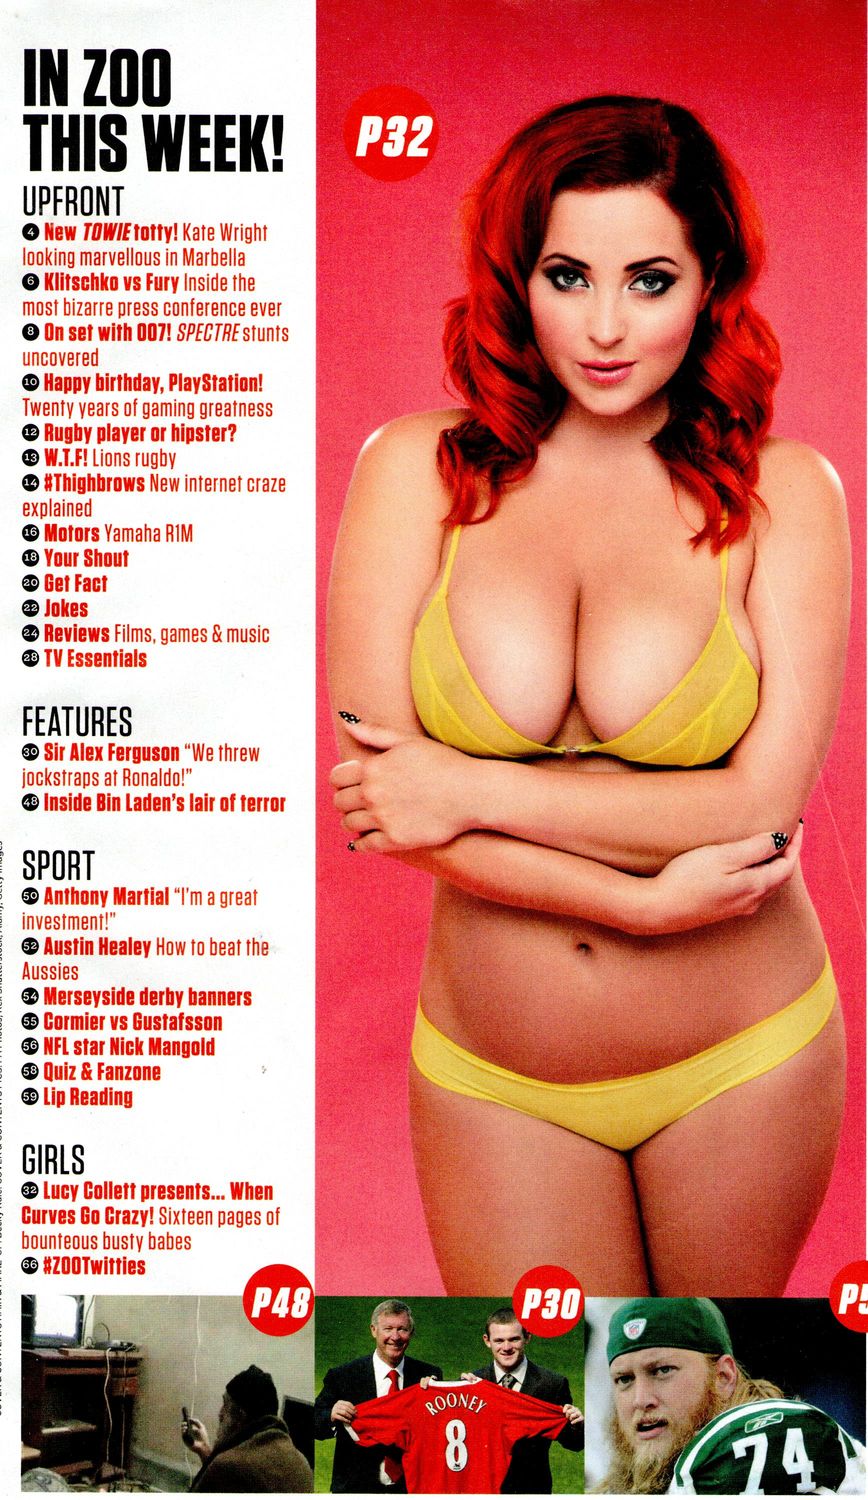 Lucy Collett shaved pussy